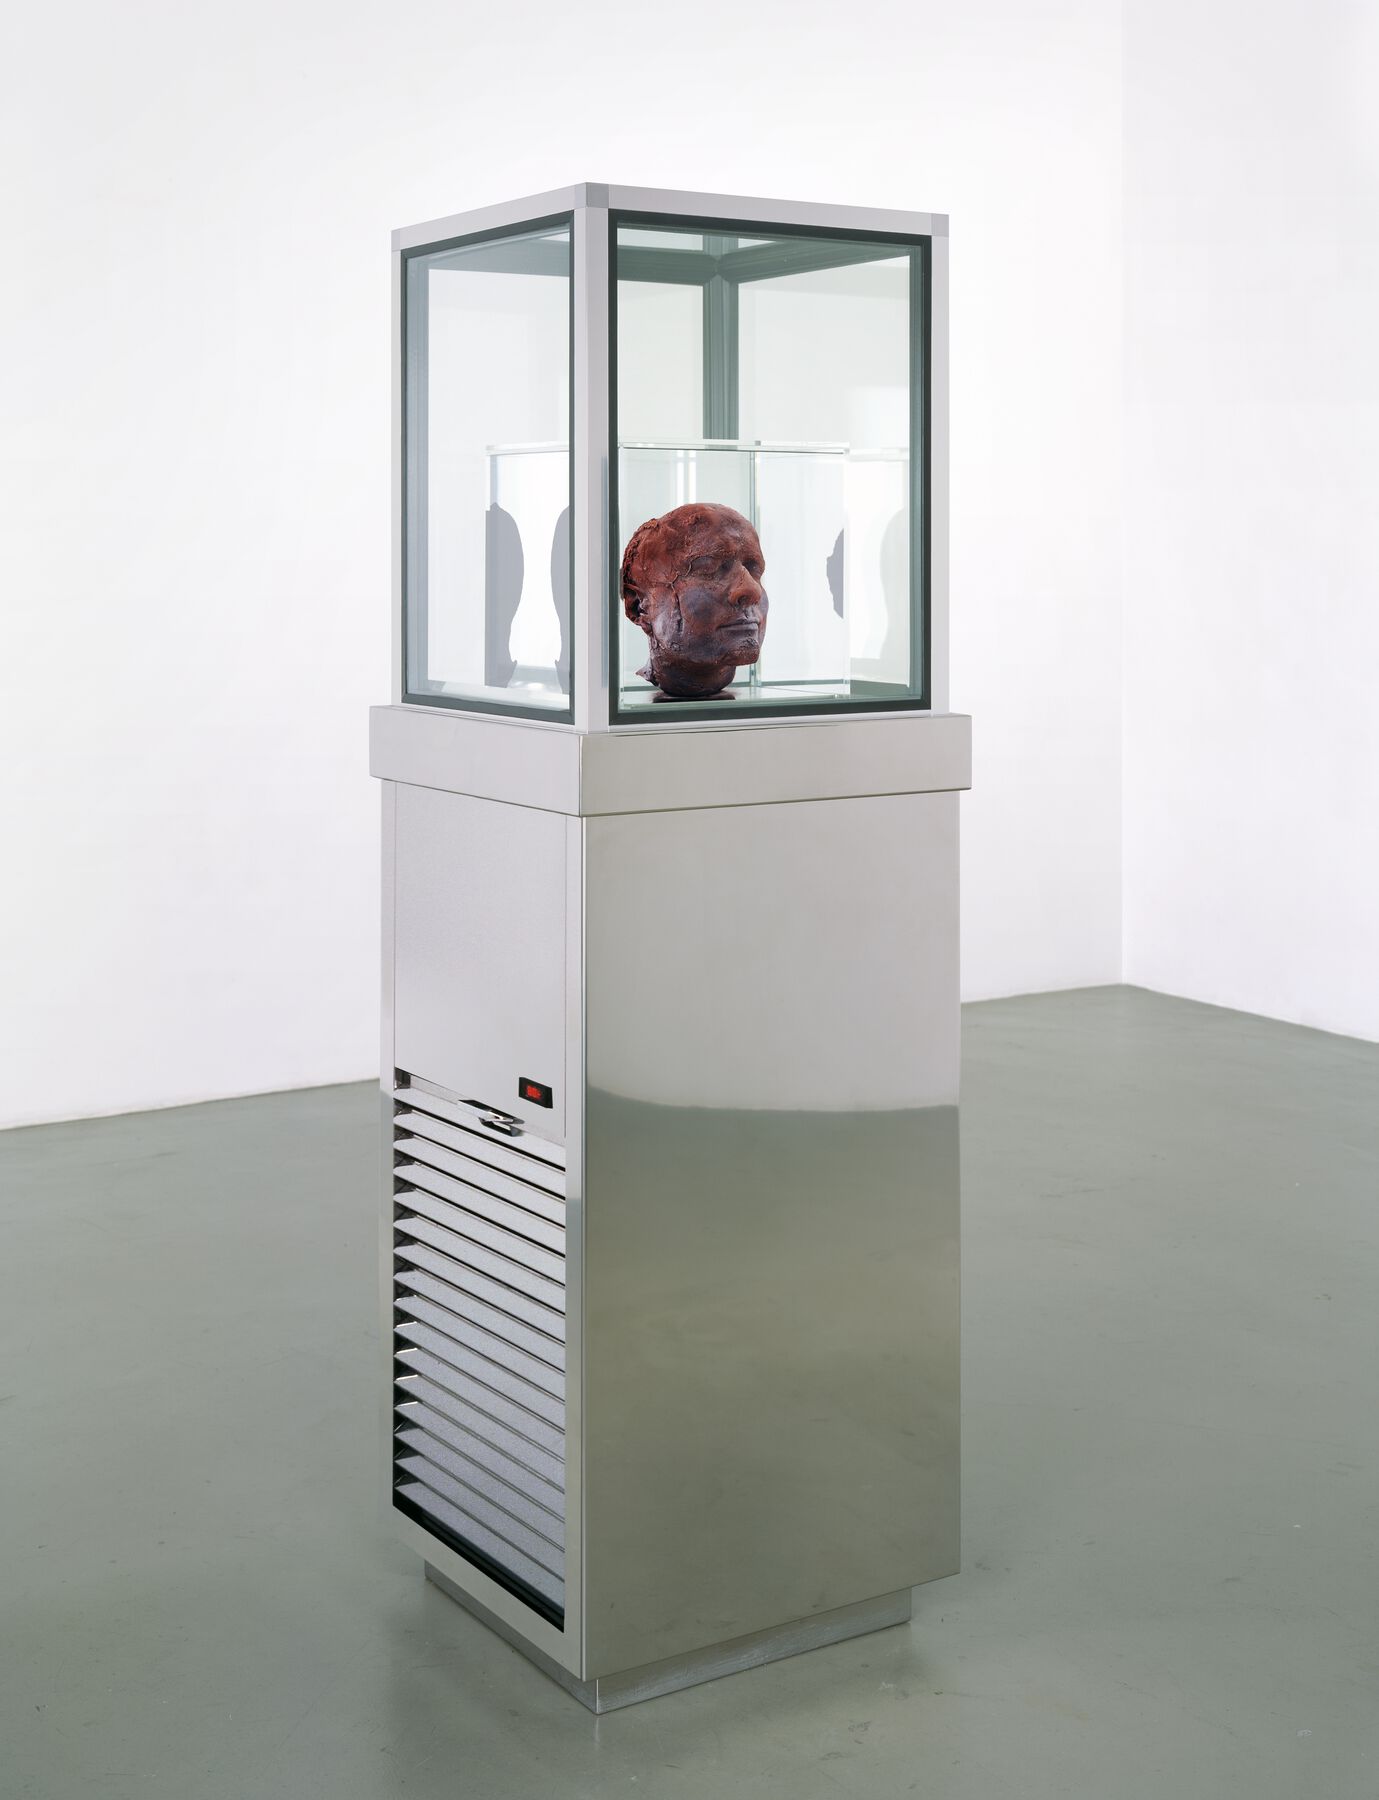 A head sculpture made from blood that is textured like red meat contained in a specialized refrigerated displaying cabinet